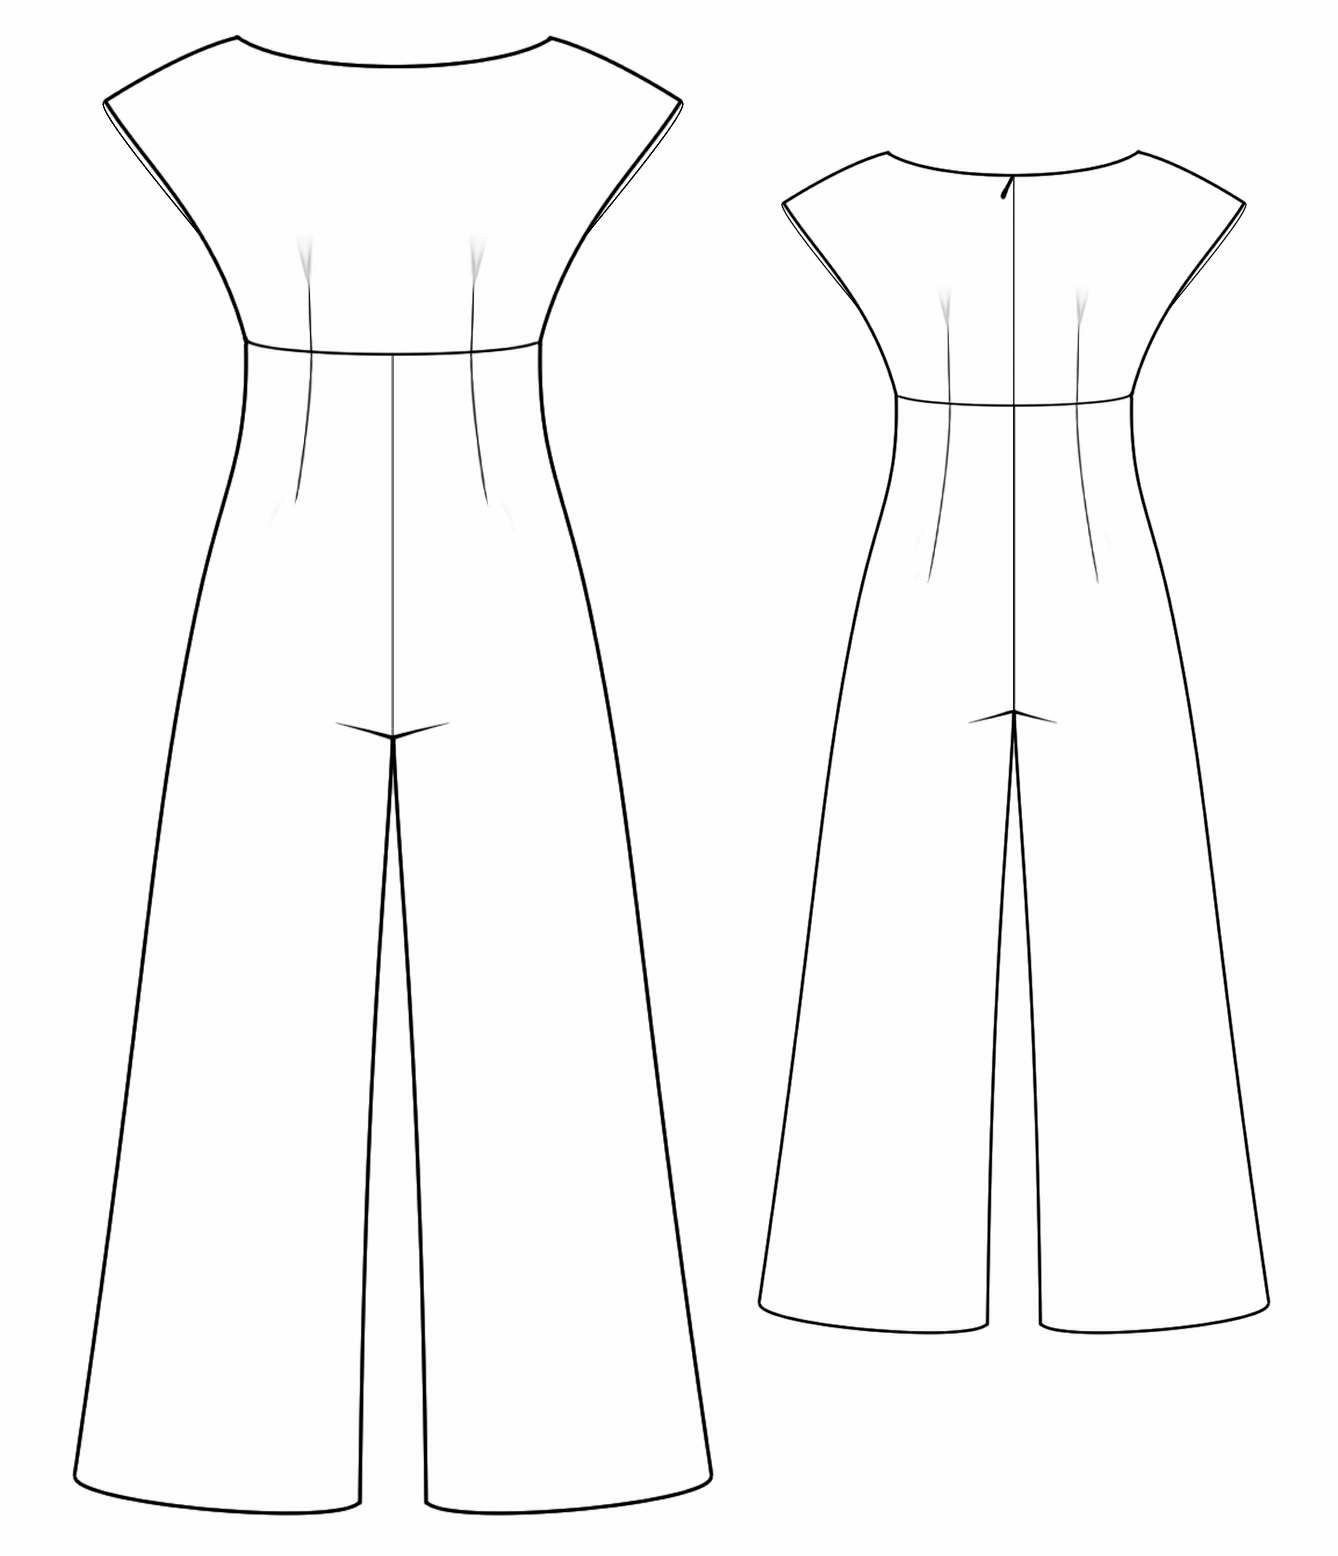 sewing pattern instructions online